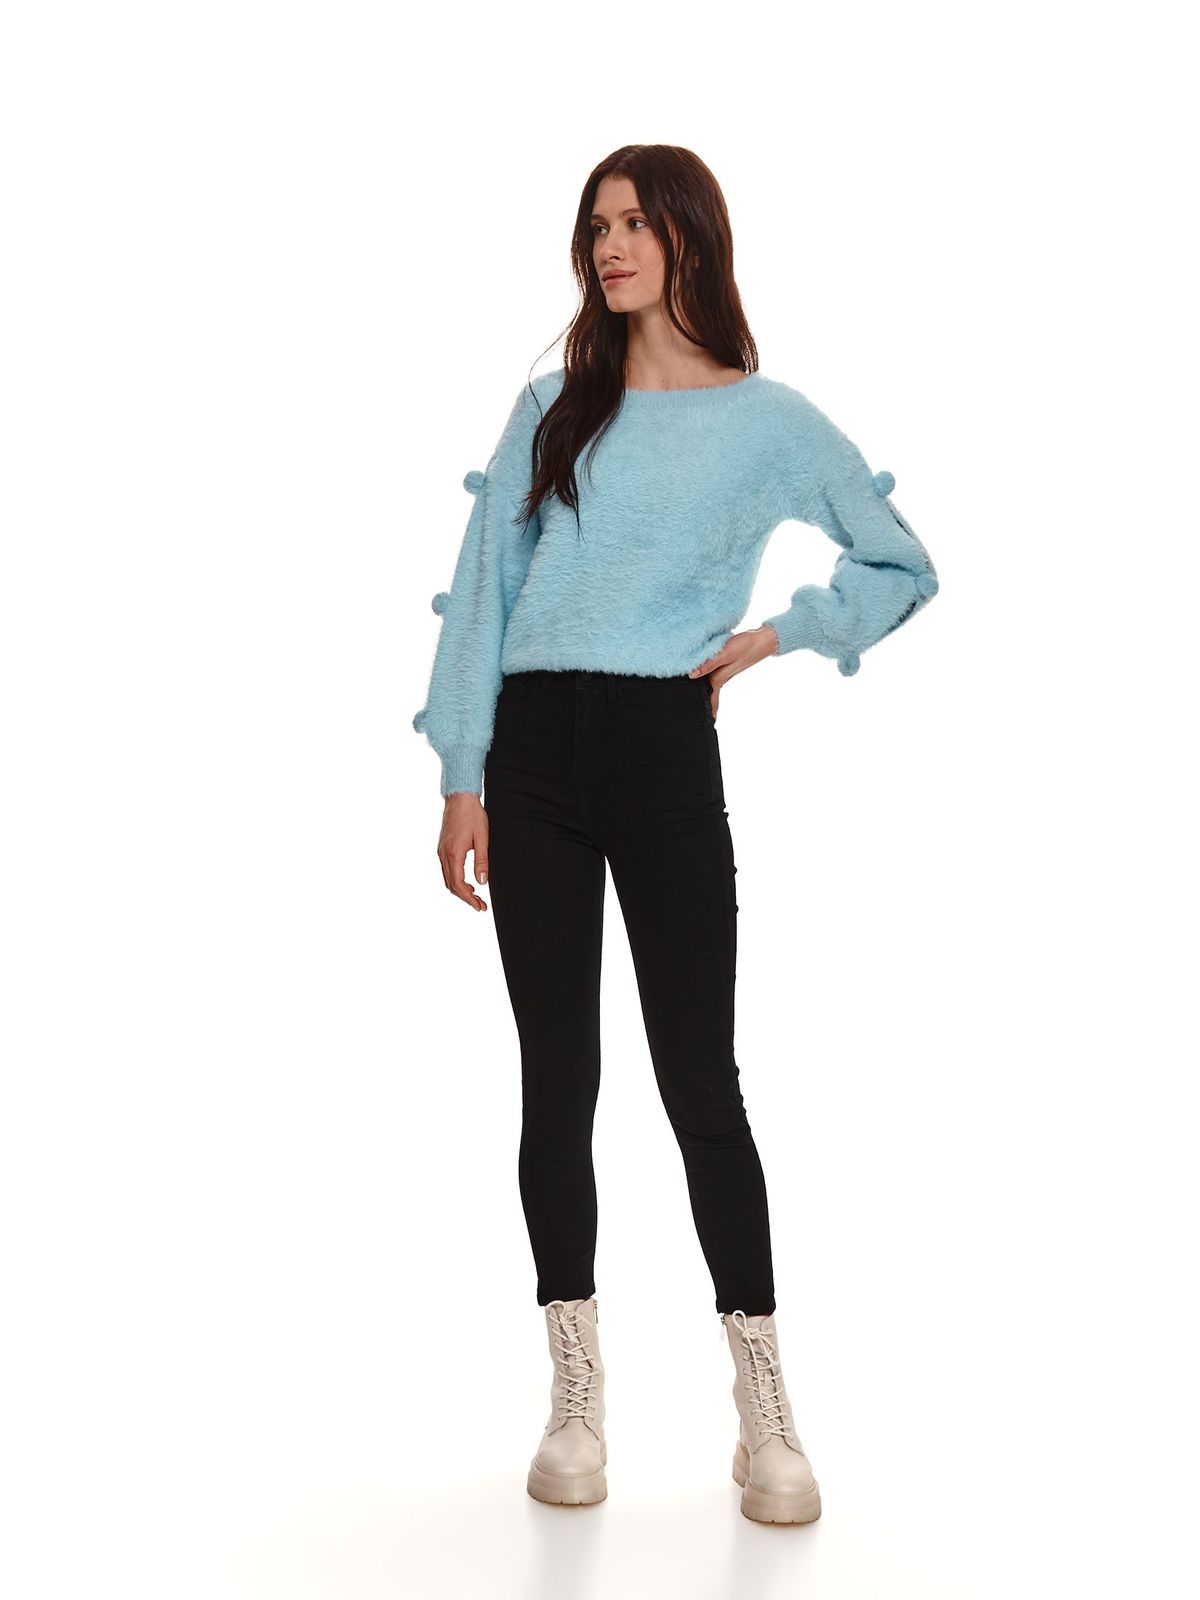 Lightblue sweater loose fit with cut-out sleeves from fluffy fabric